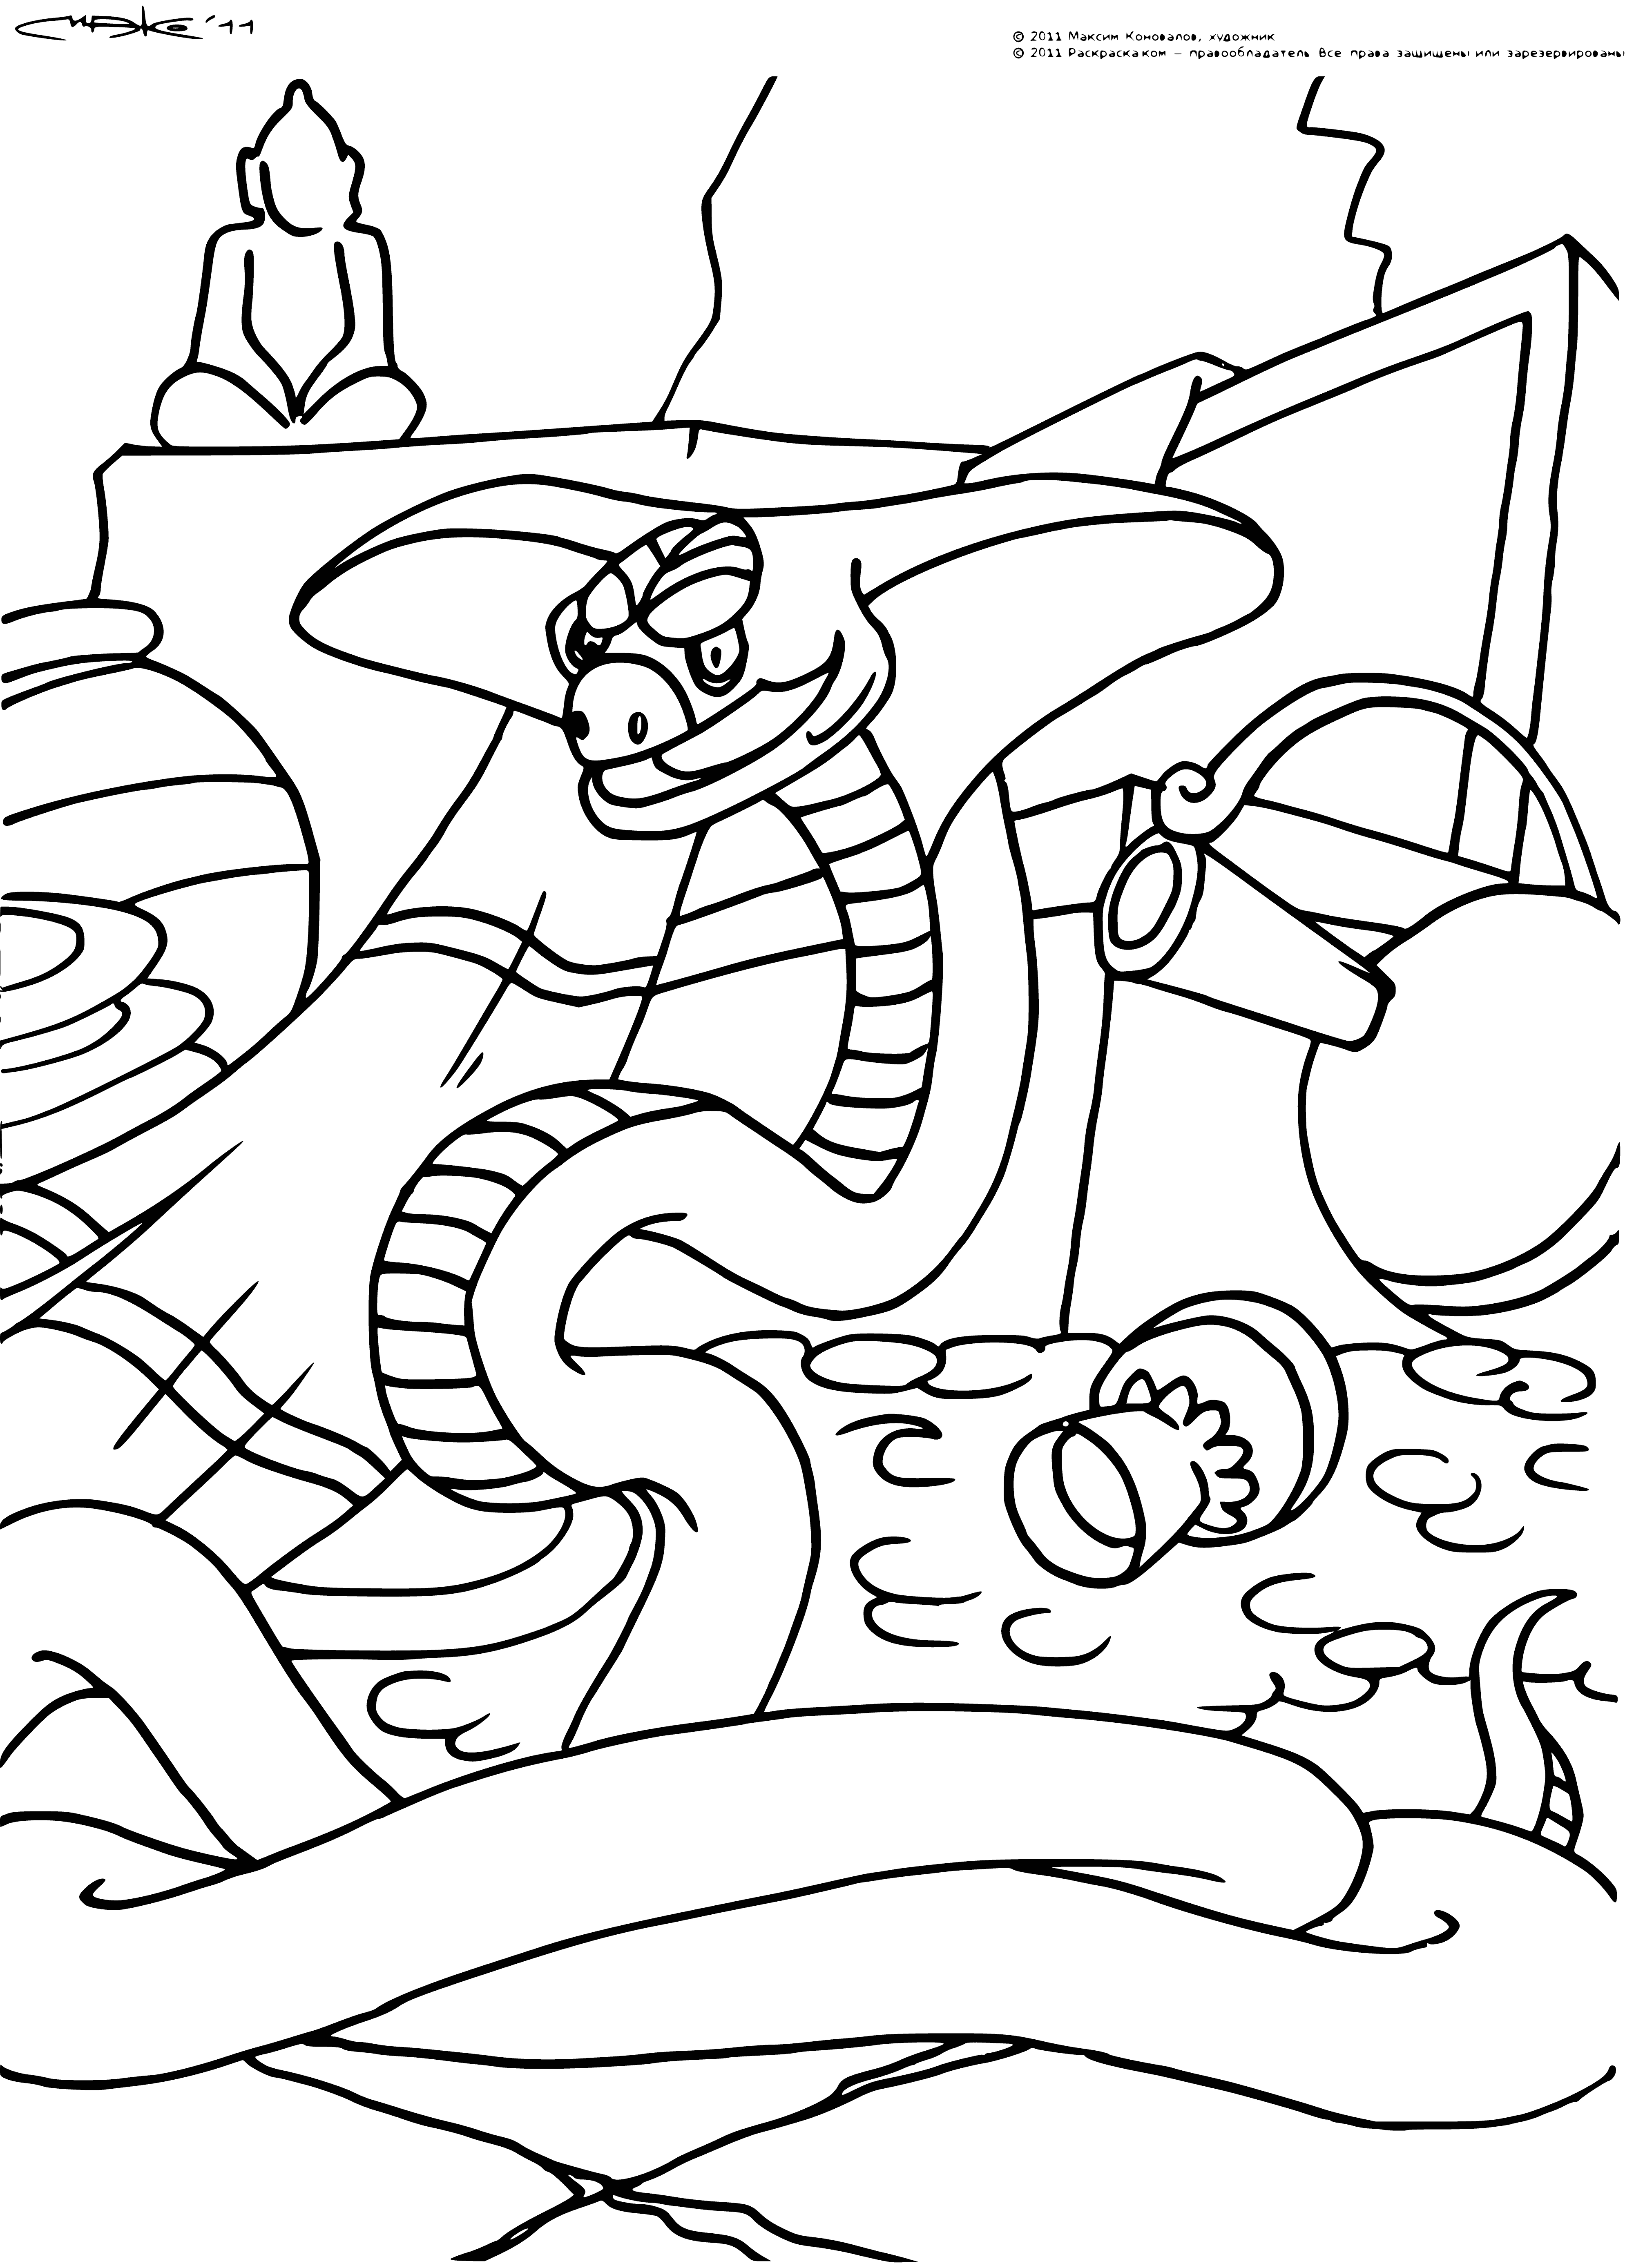 coloring page: Mowgli is small, barefoot & facing a giant white cobra. The cobra hood is flared, & its eyes are fixed on Mowgli. Fear on his face, but he stands his ground. #TheJungleBook